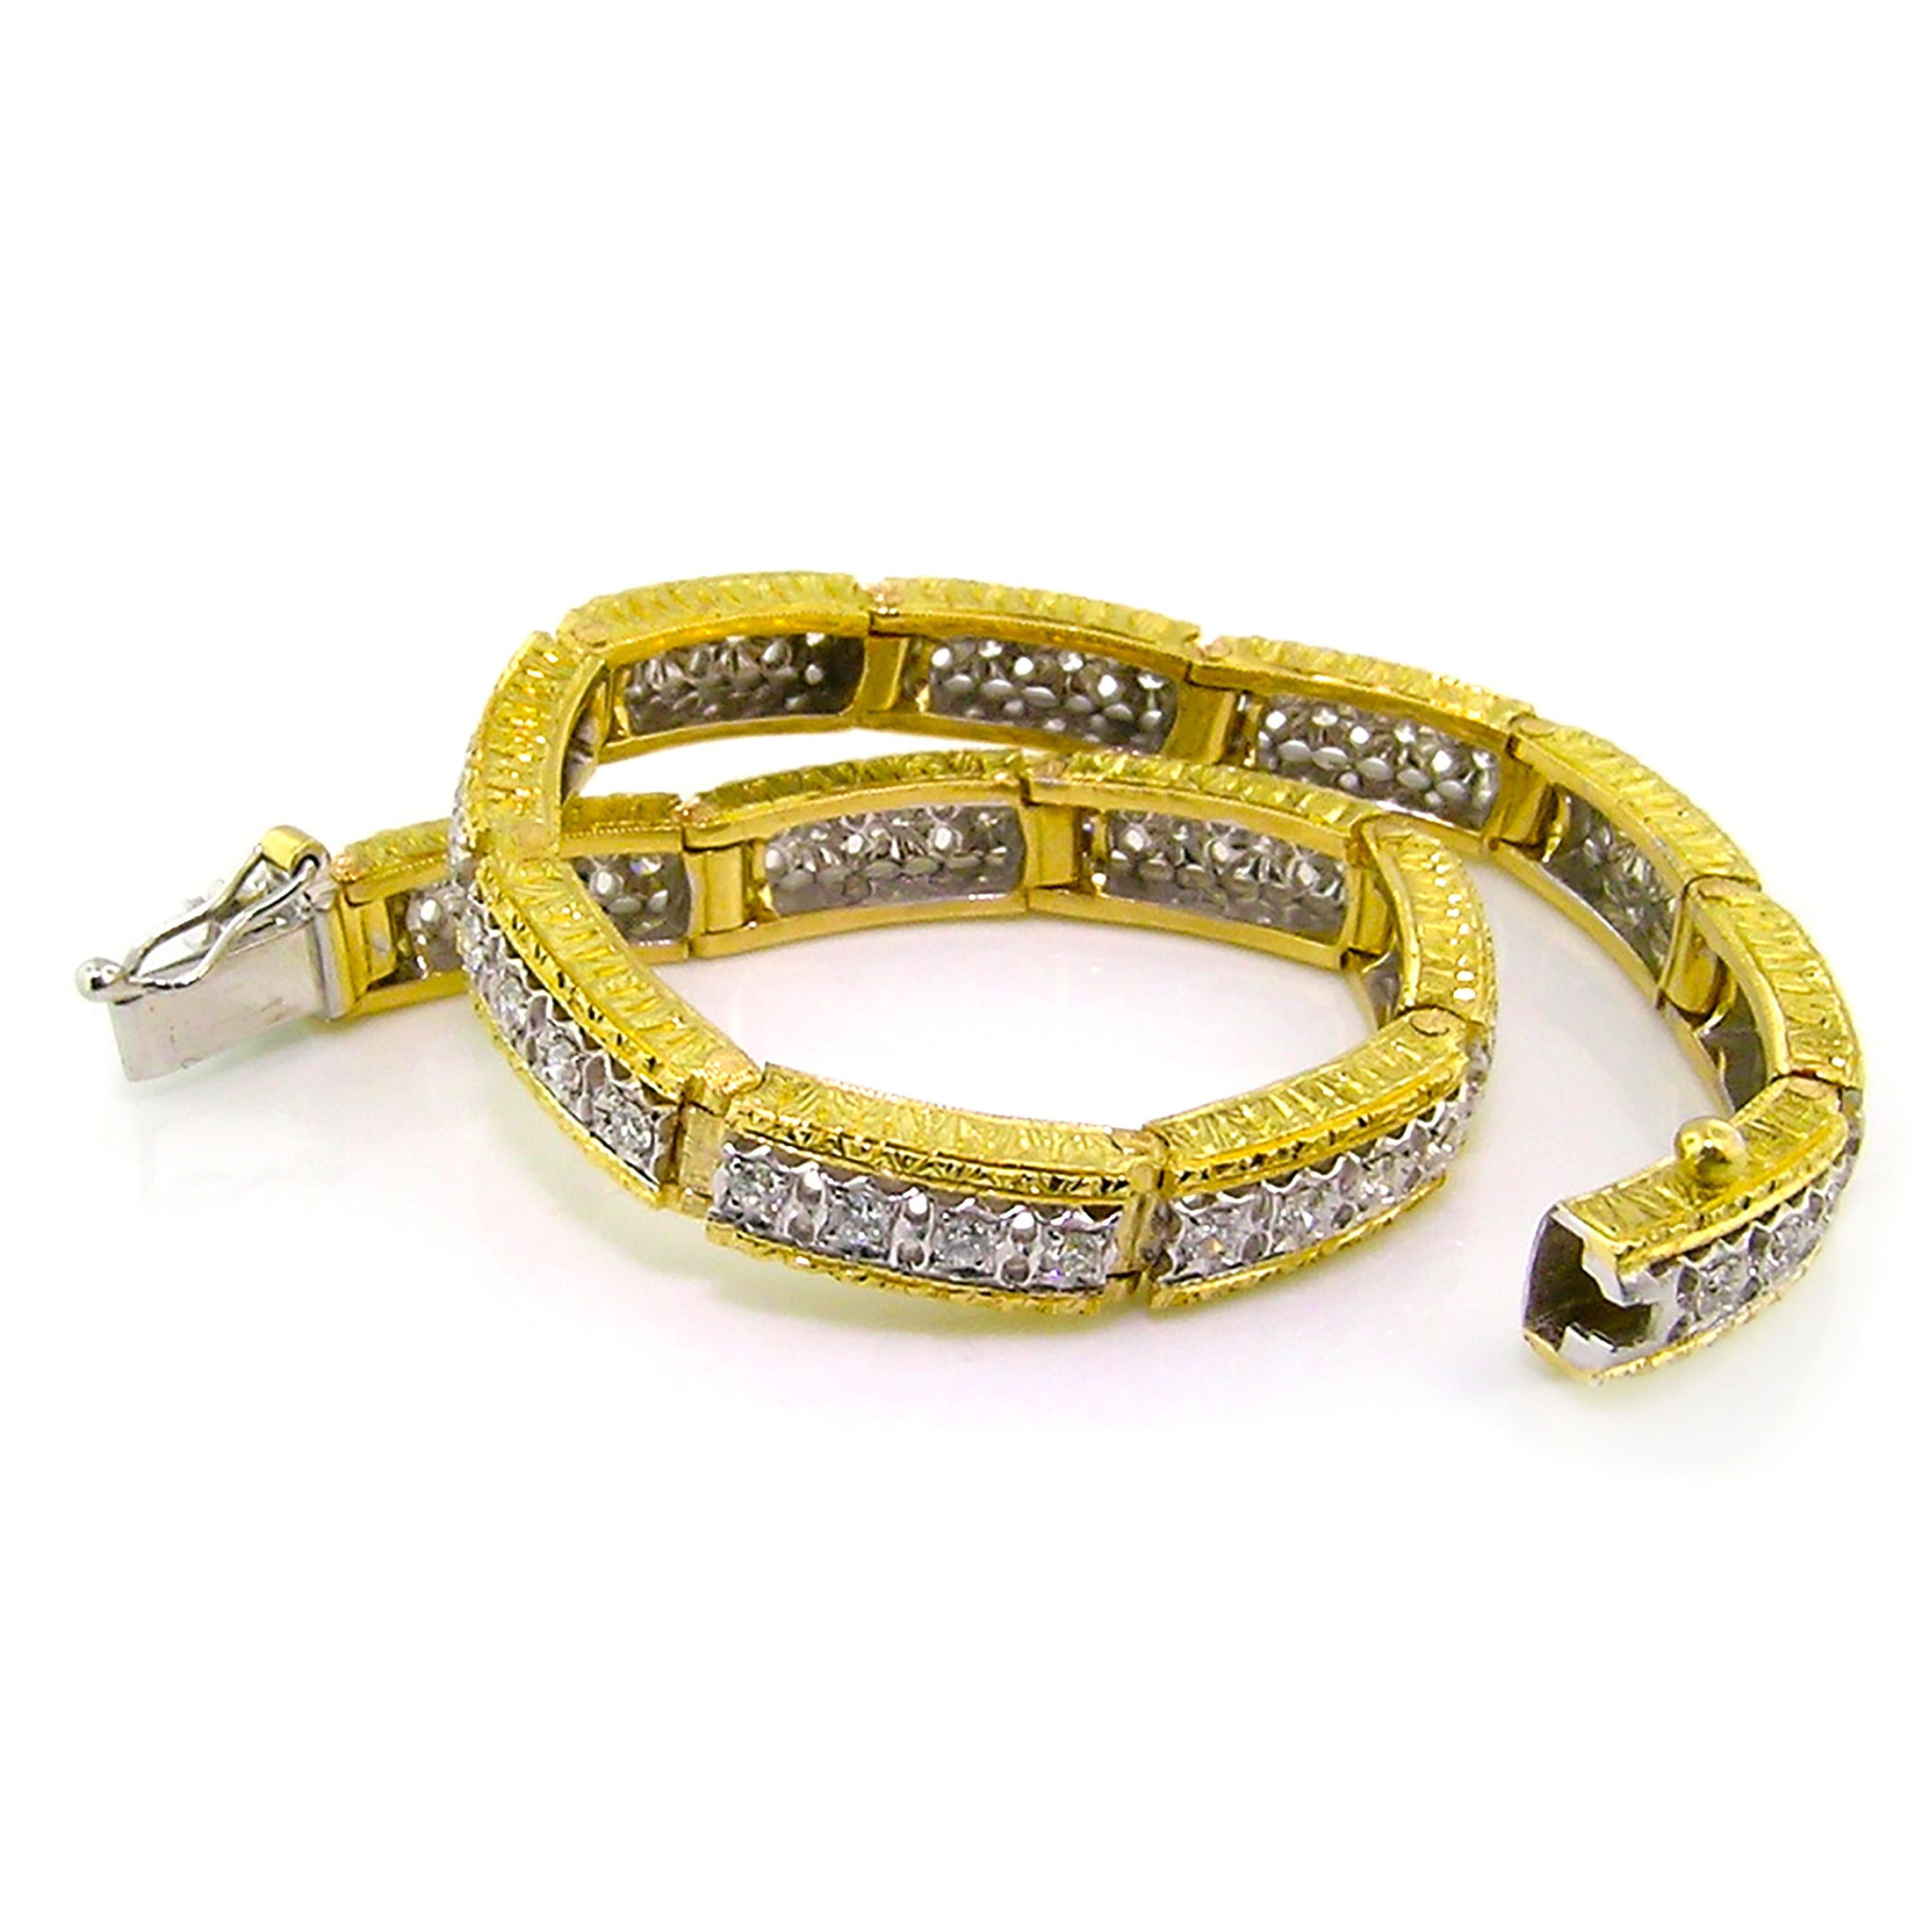 18kt Gold and Diamond Florentine Engraved Bracelet, Handmade in Italy In New Condition For Sale In Logan, UT